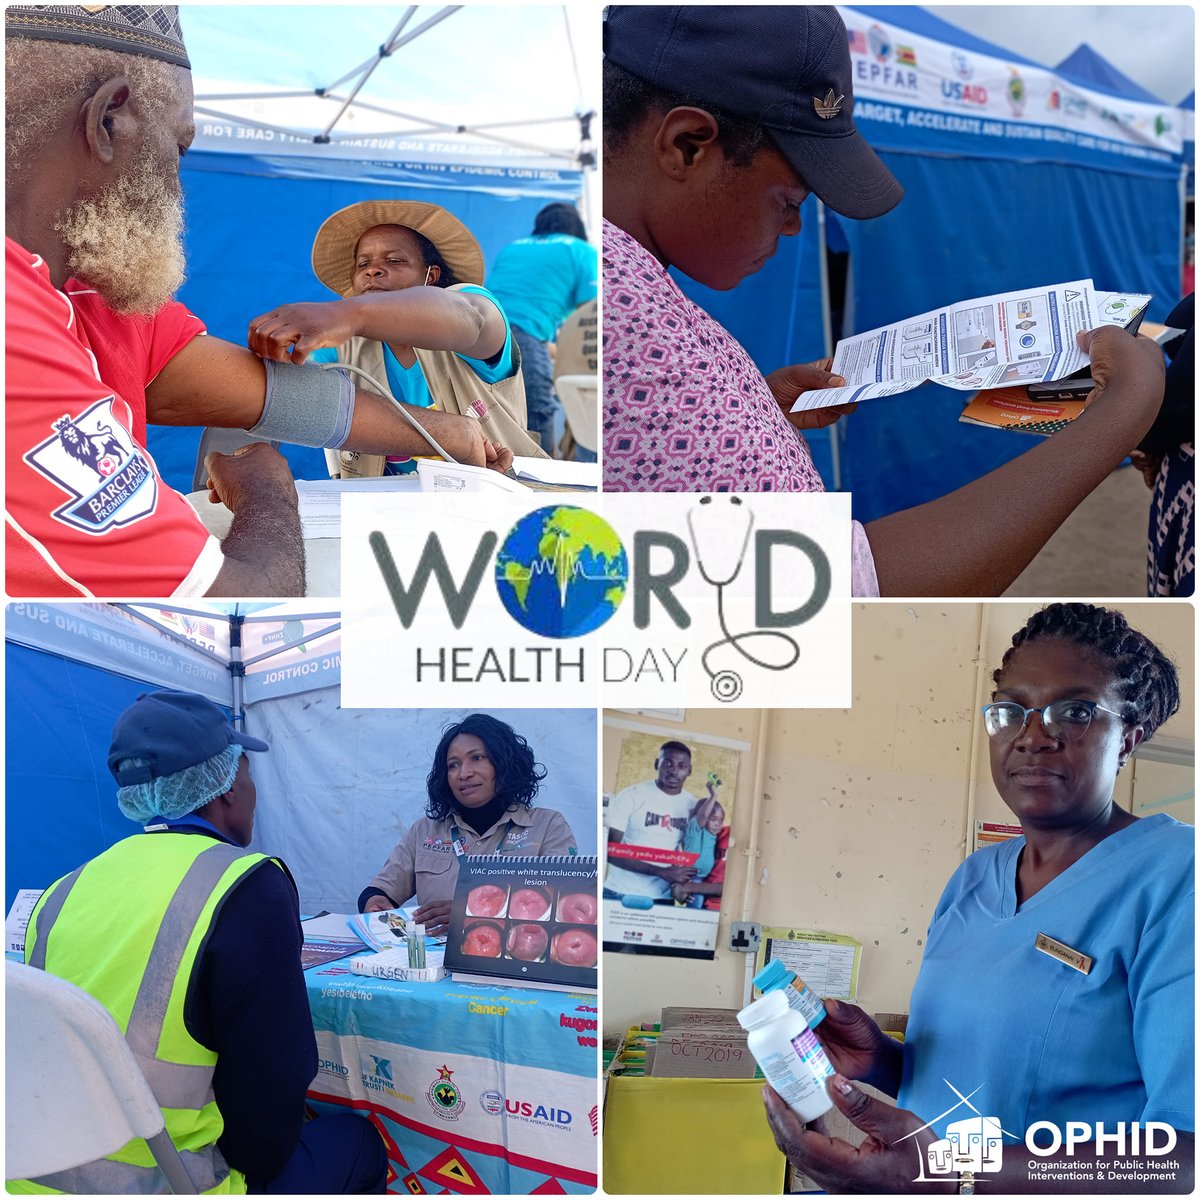 As we celebrate #WorldHealthWeek, let us remember that access to essential healthcare is a fundamental human right. OPHID stands with global partners to advocate for equitable healthcare access & quality services for all. Join us in making health a priority. #HealthEquity